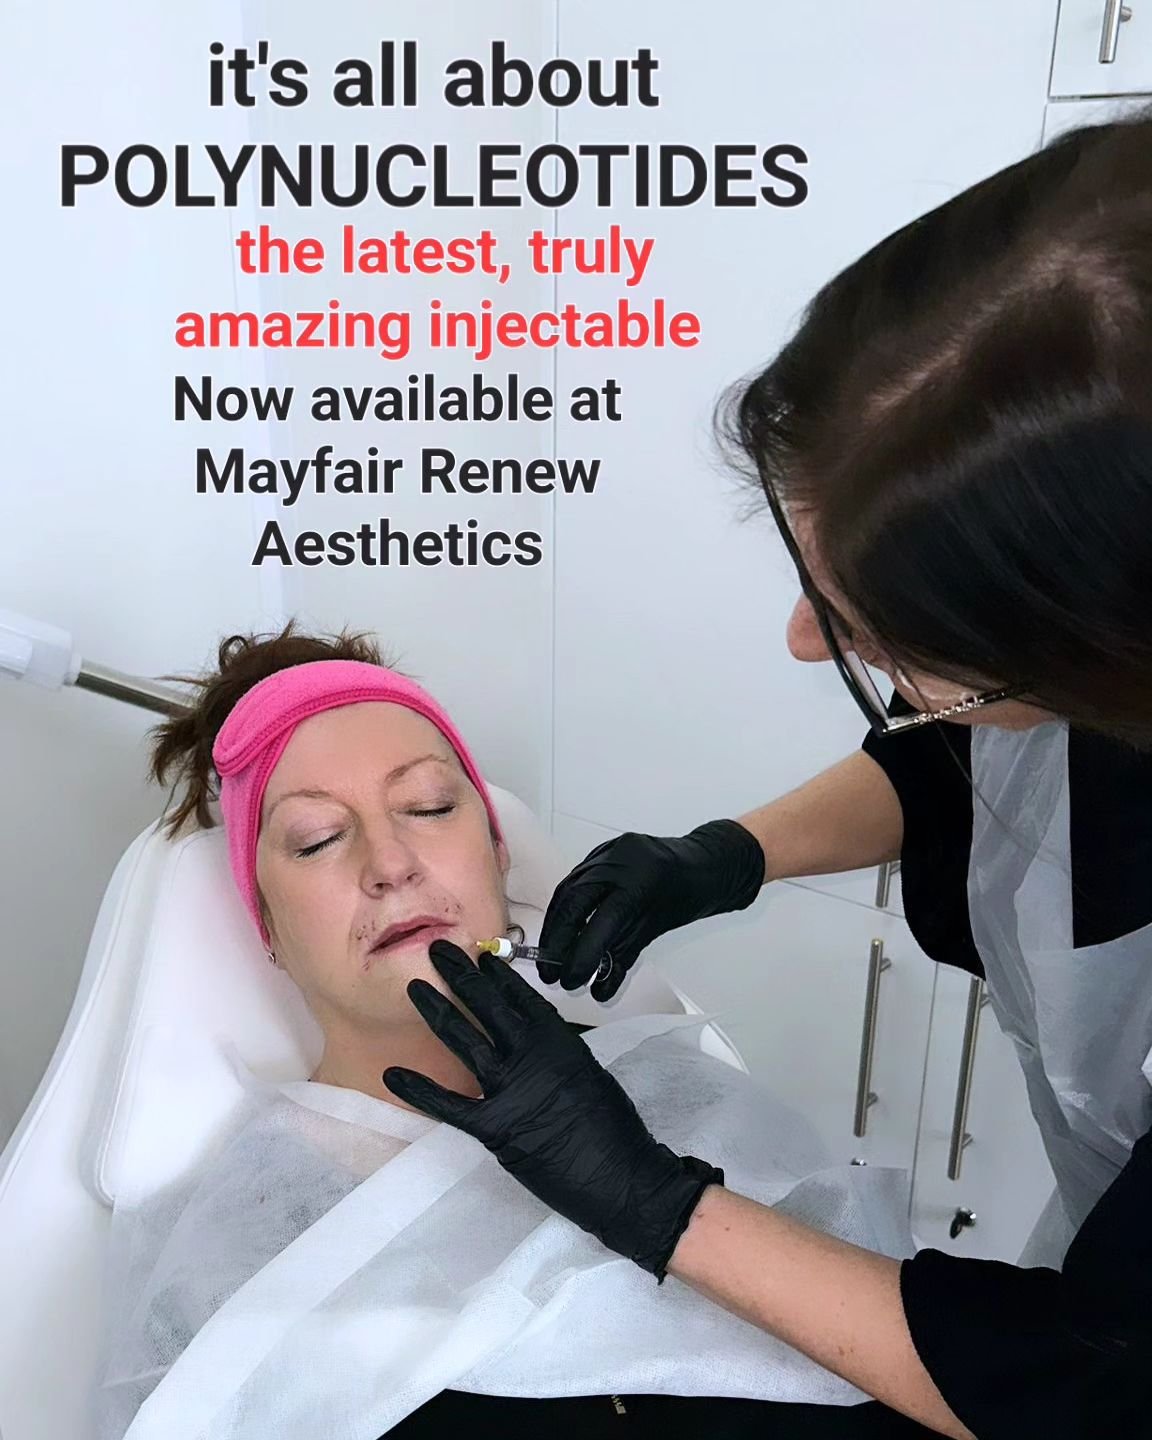 Watch this space for lots of information coming your way about how amazing polynucleotides are for your skin. For your face, eyes, neck, chest, hands, arms, knees....stomach stretch marks. Honestly, who'd have thought injecting the sperm of salmon co